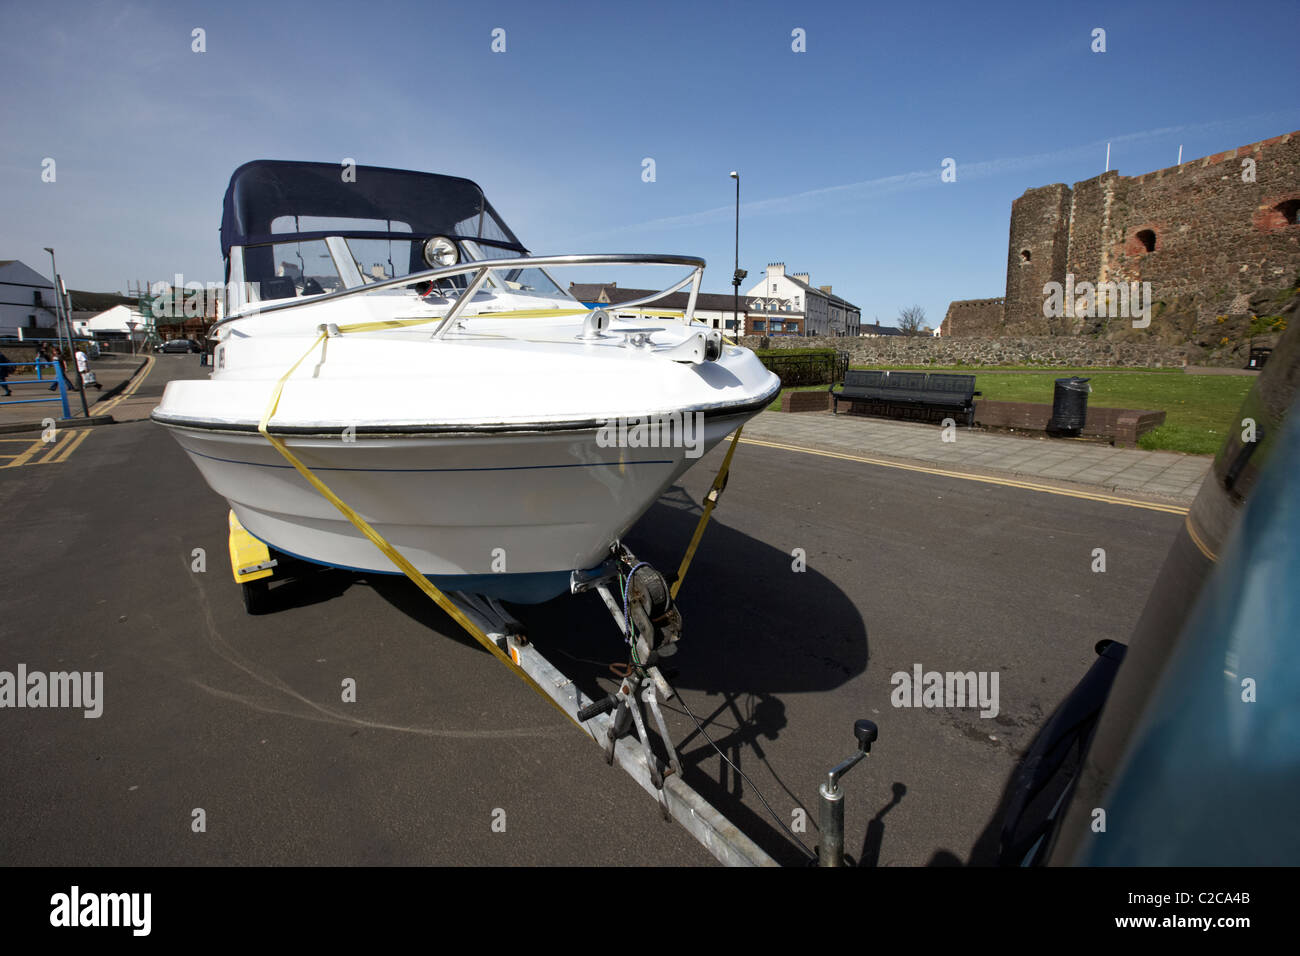 boat on trailer attached to the back of a car getting ready for launch in the uk Stock Photo